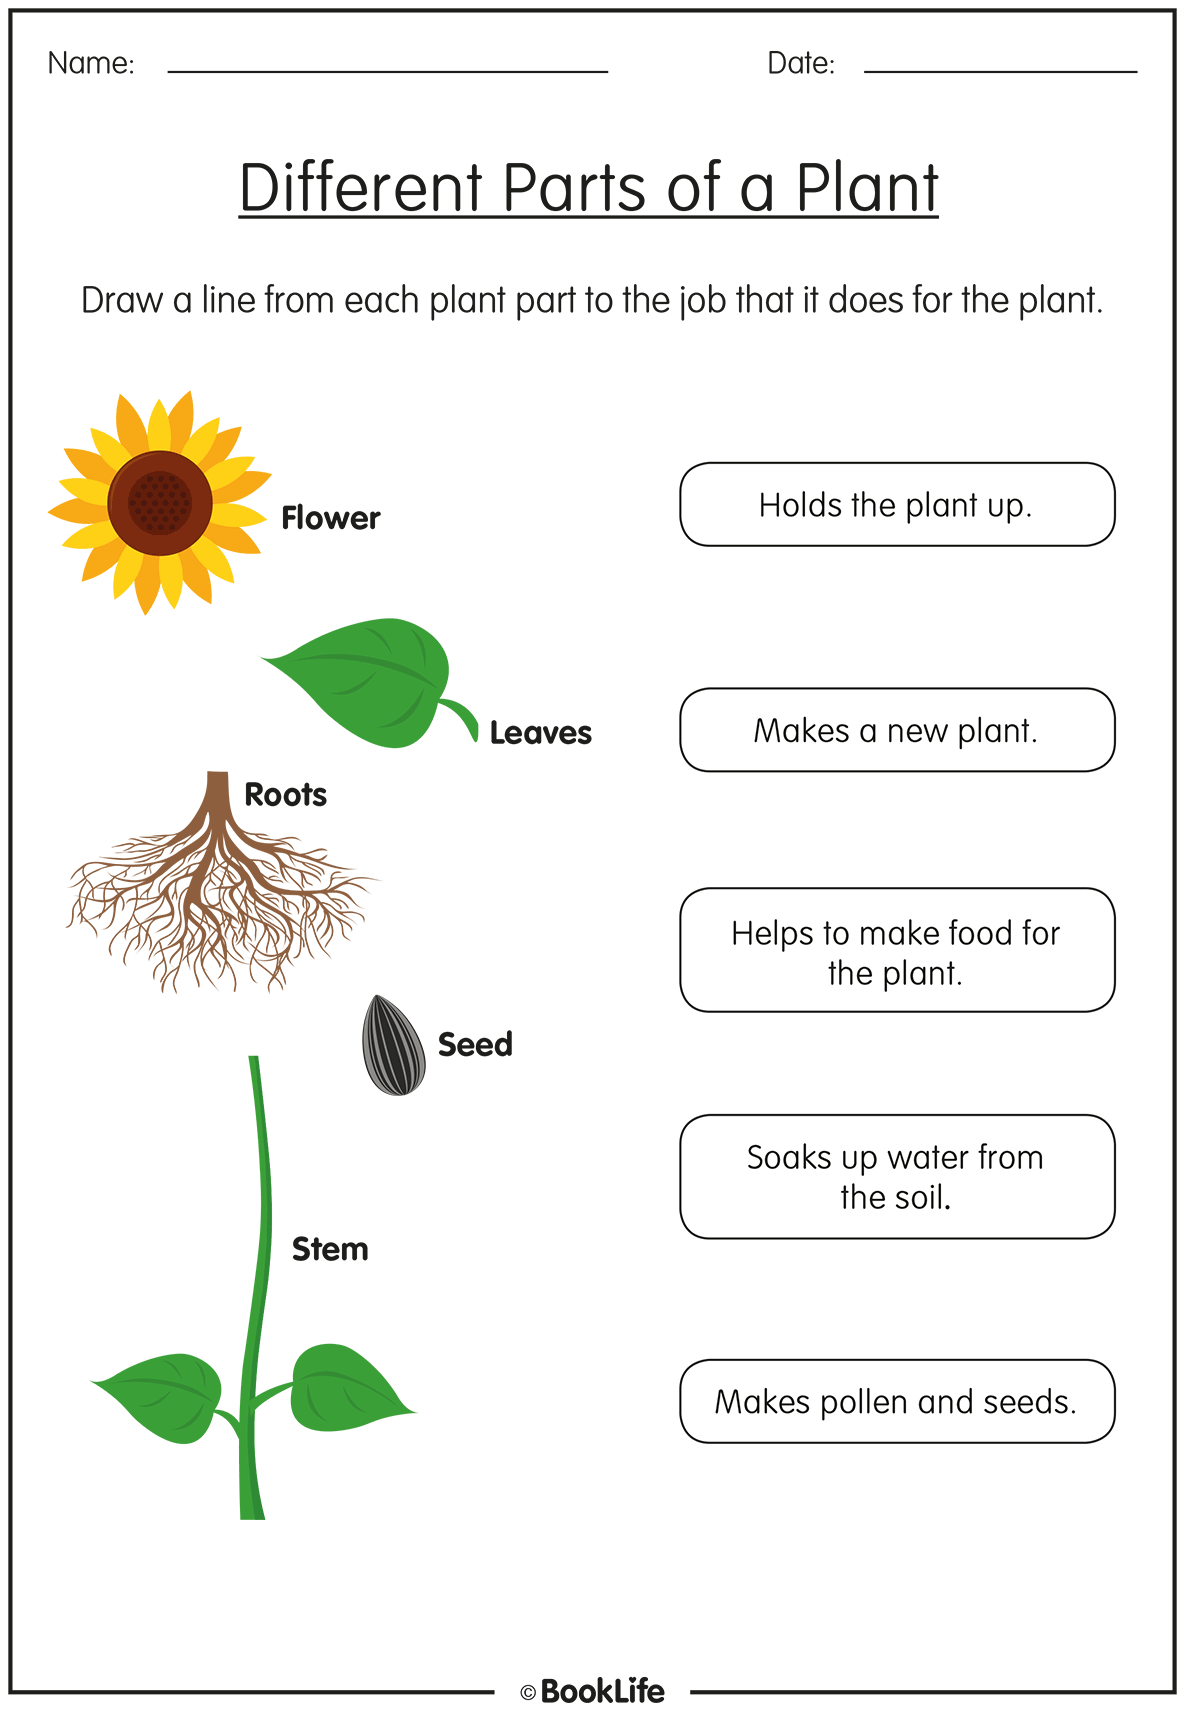 Different Parts of a Plant by BookLife